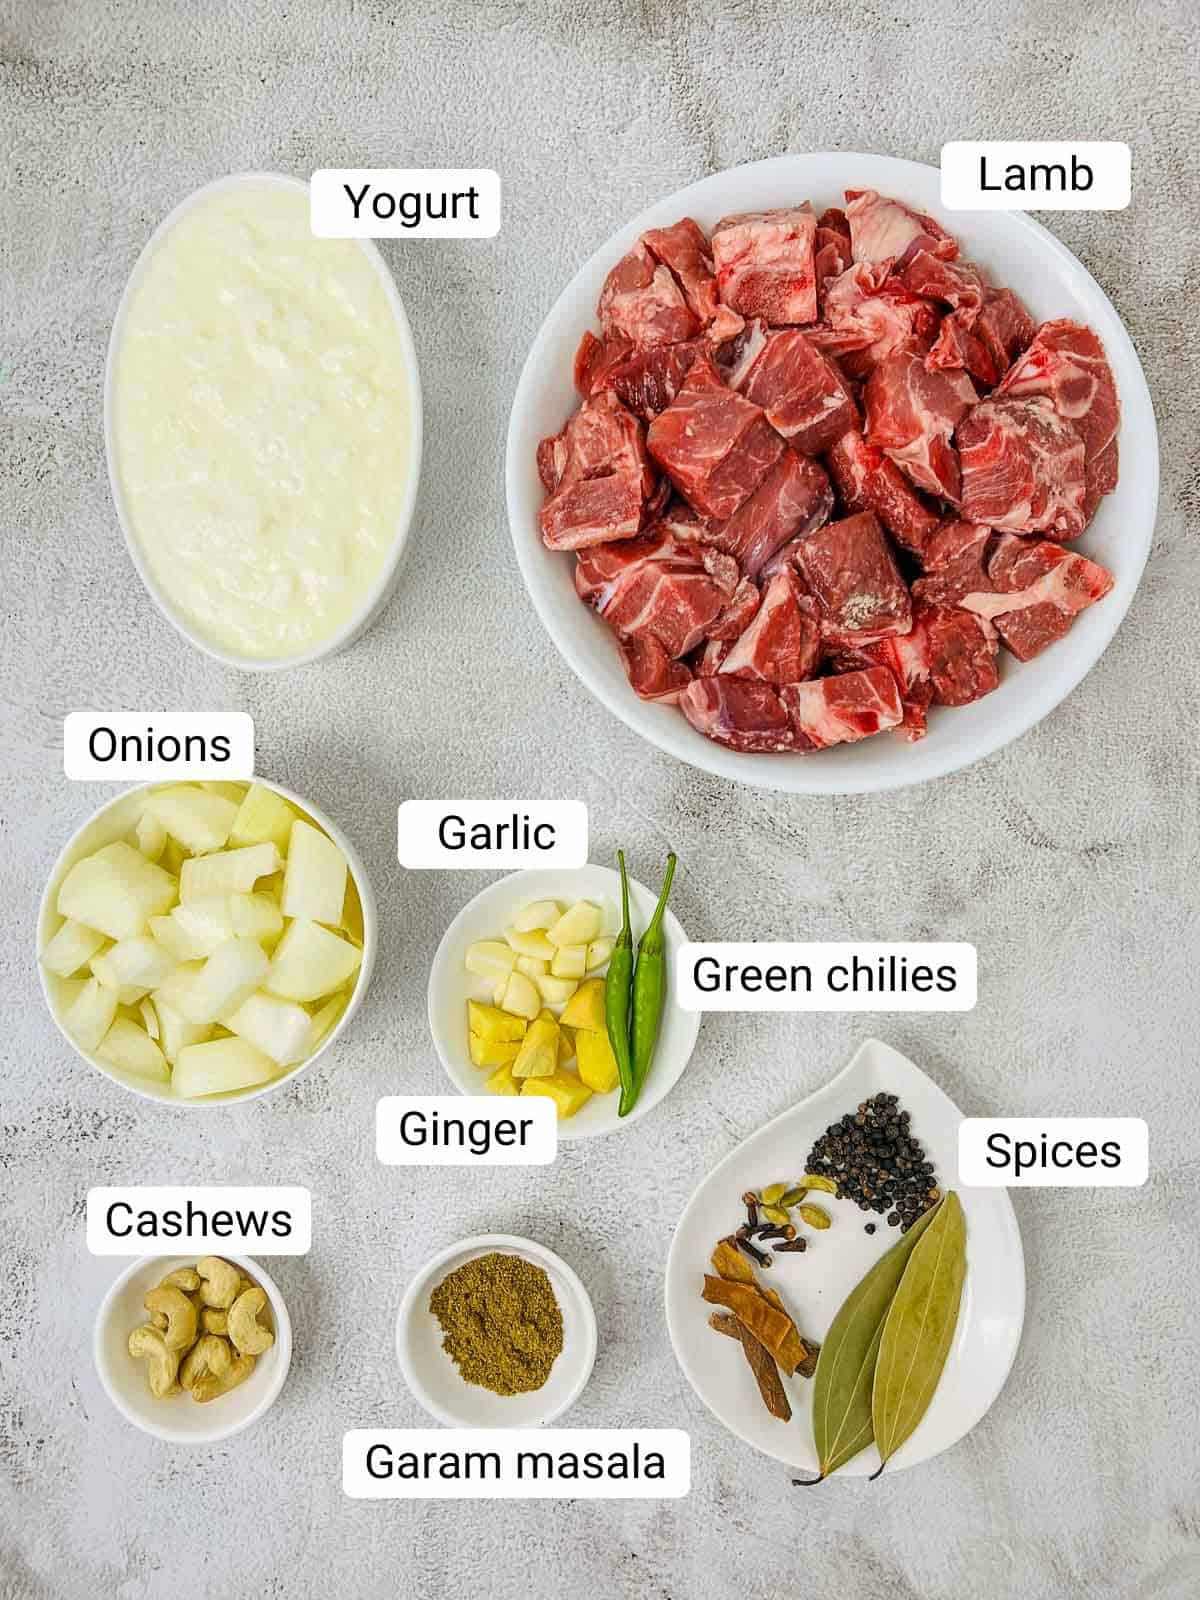 Ingredients to make lamb rezala placed on a white surface.